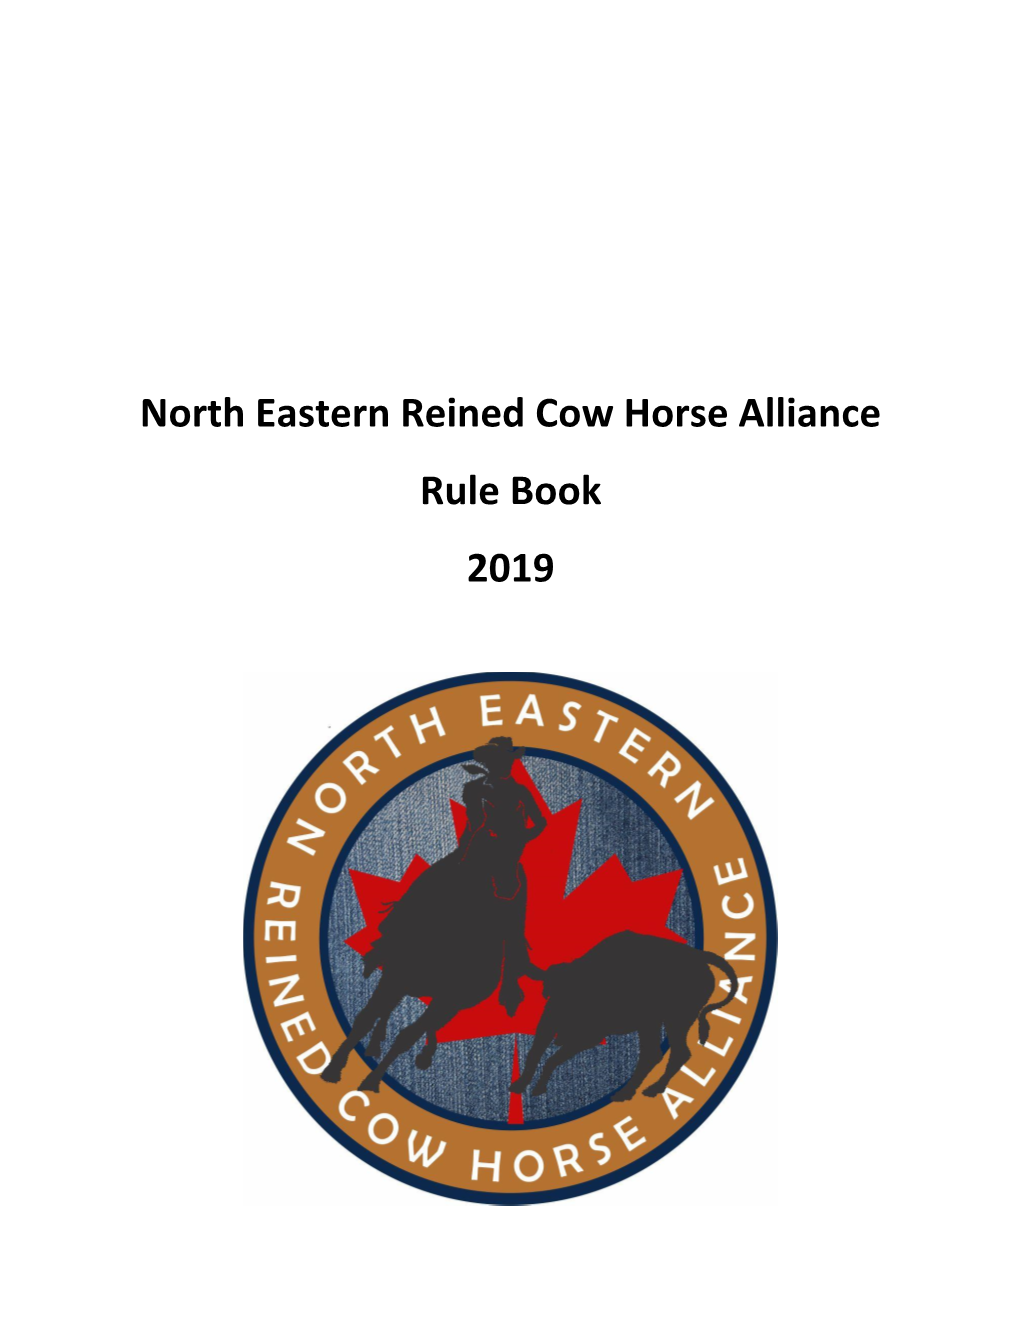 North Eastern Reined Cow Horse Alliance Rule Book 2019